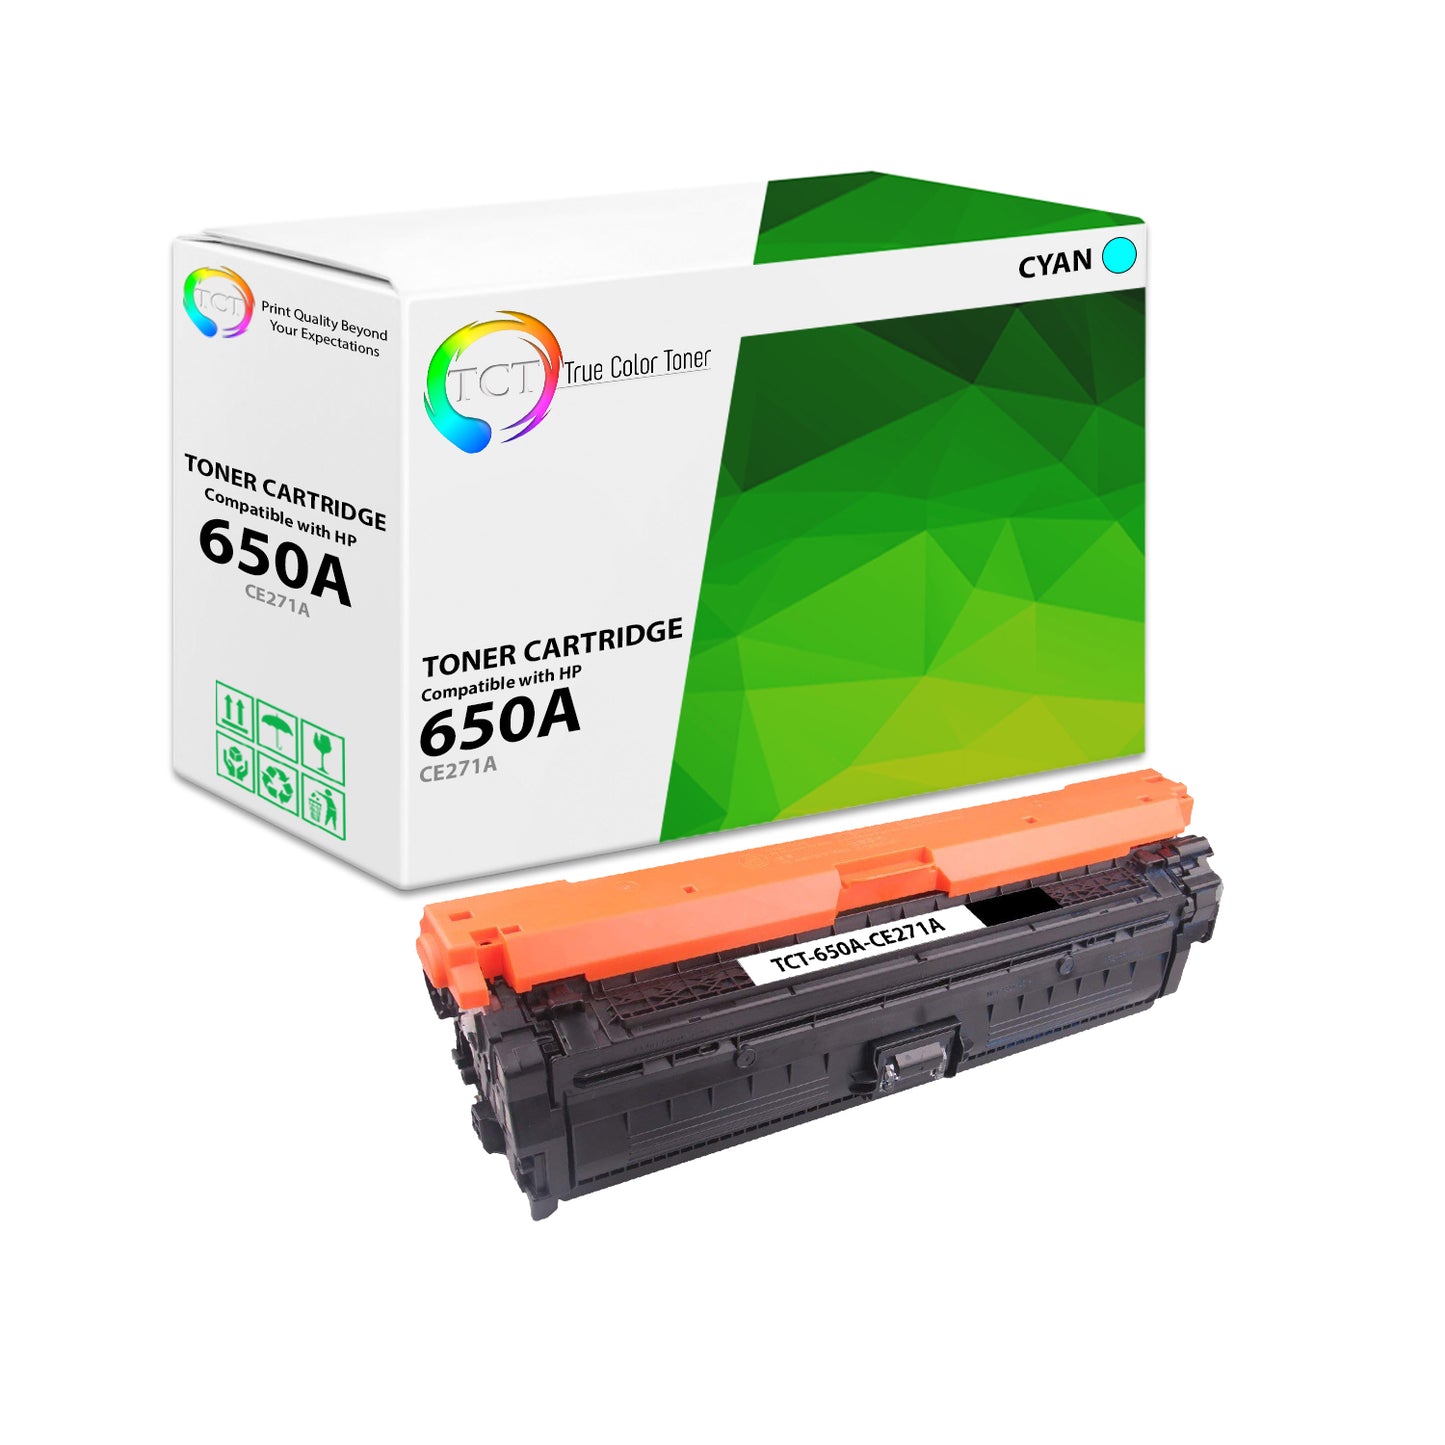 TCT Compatible Toner Cartridge Replacement for the HP 650A Series - 1 Pack Cyan